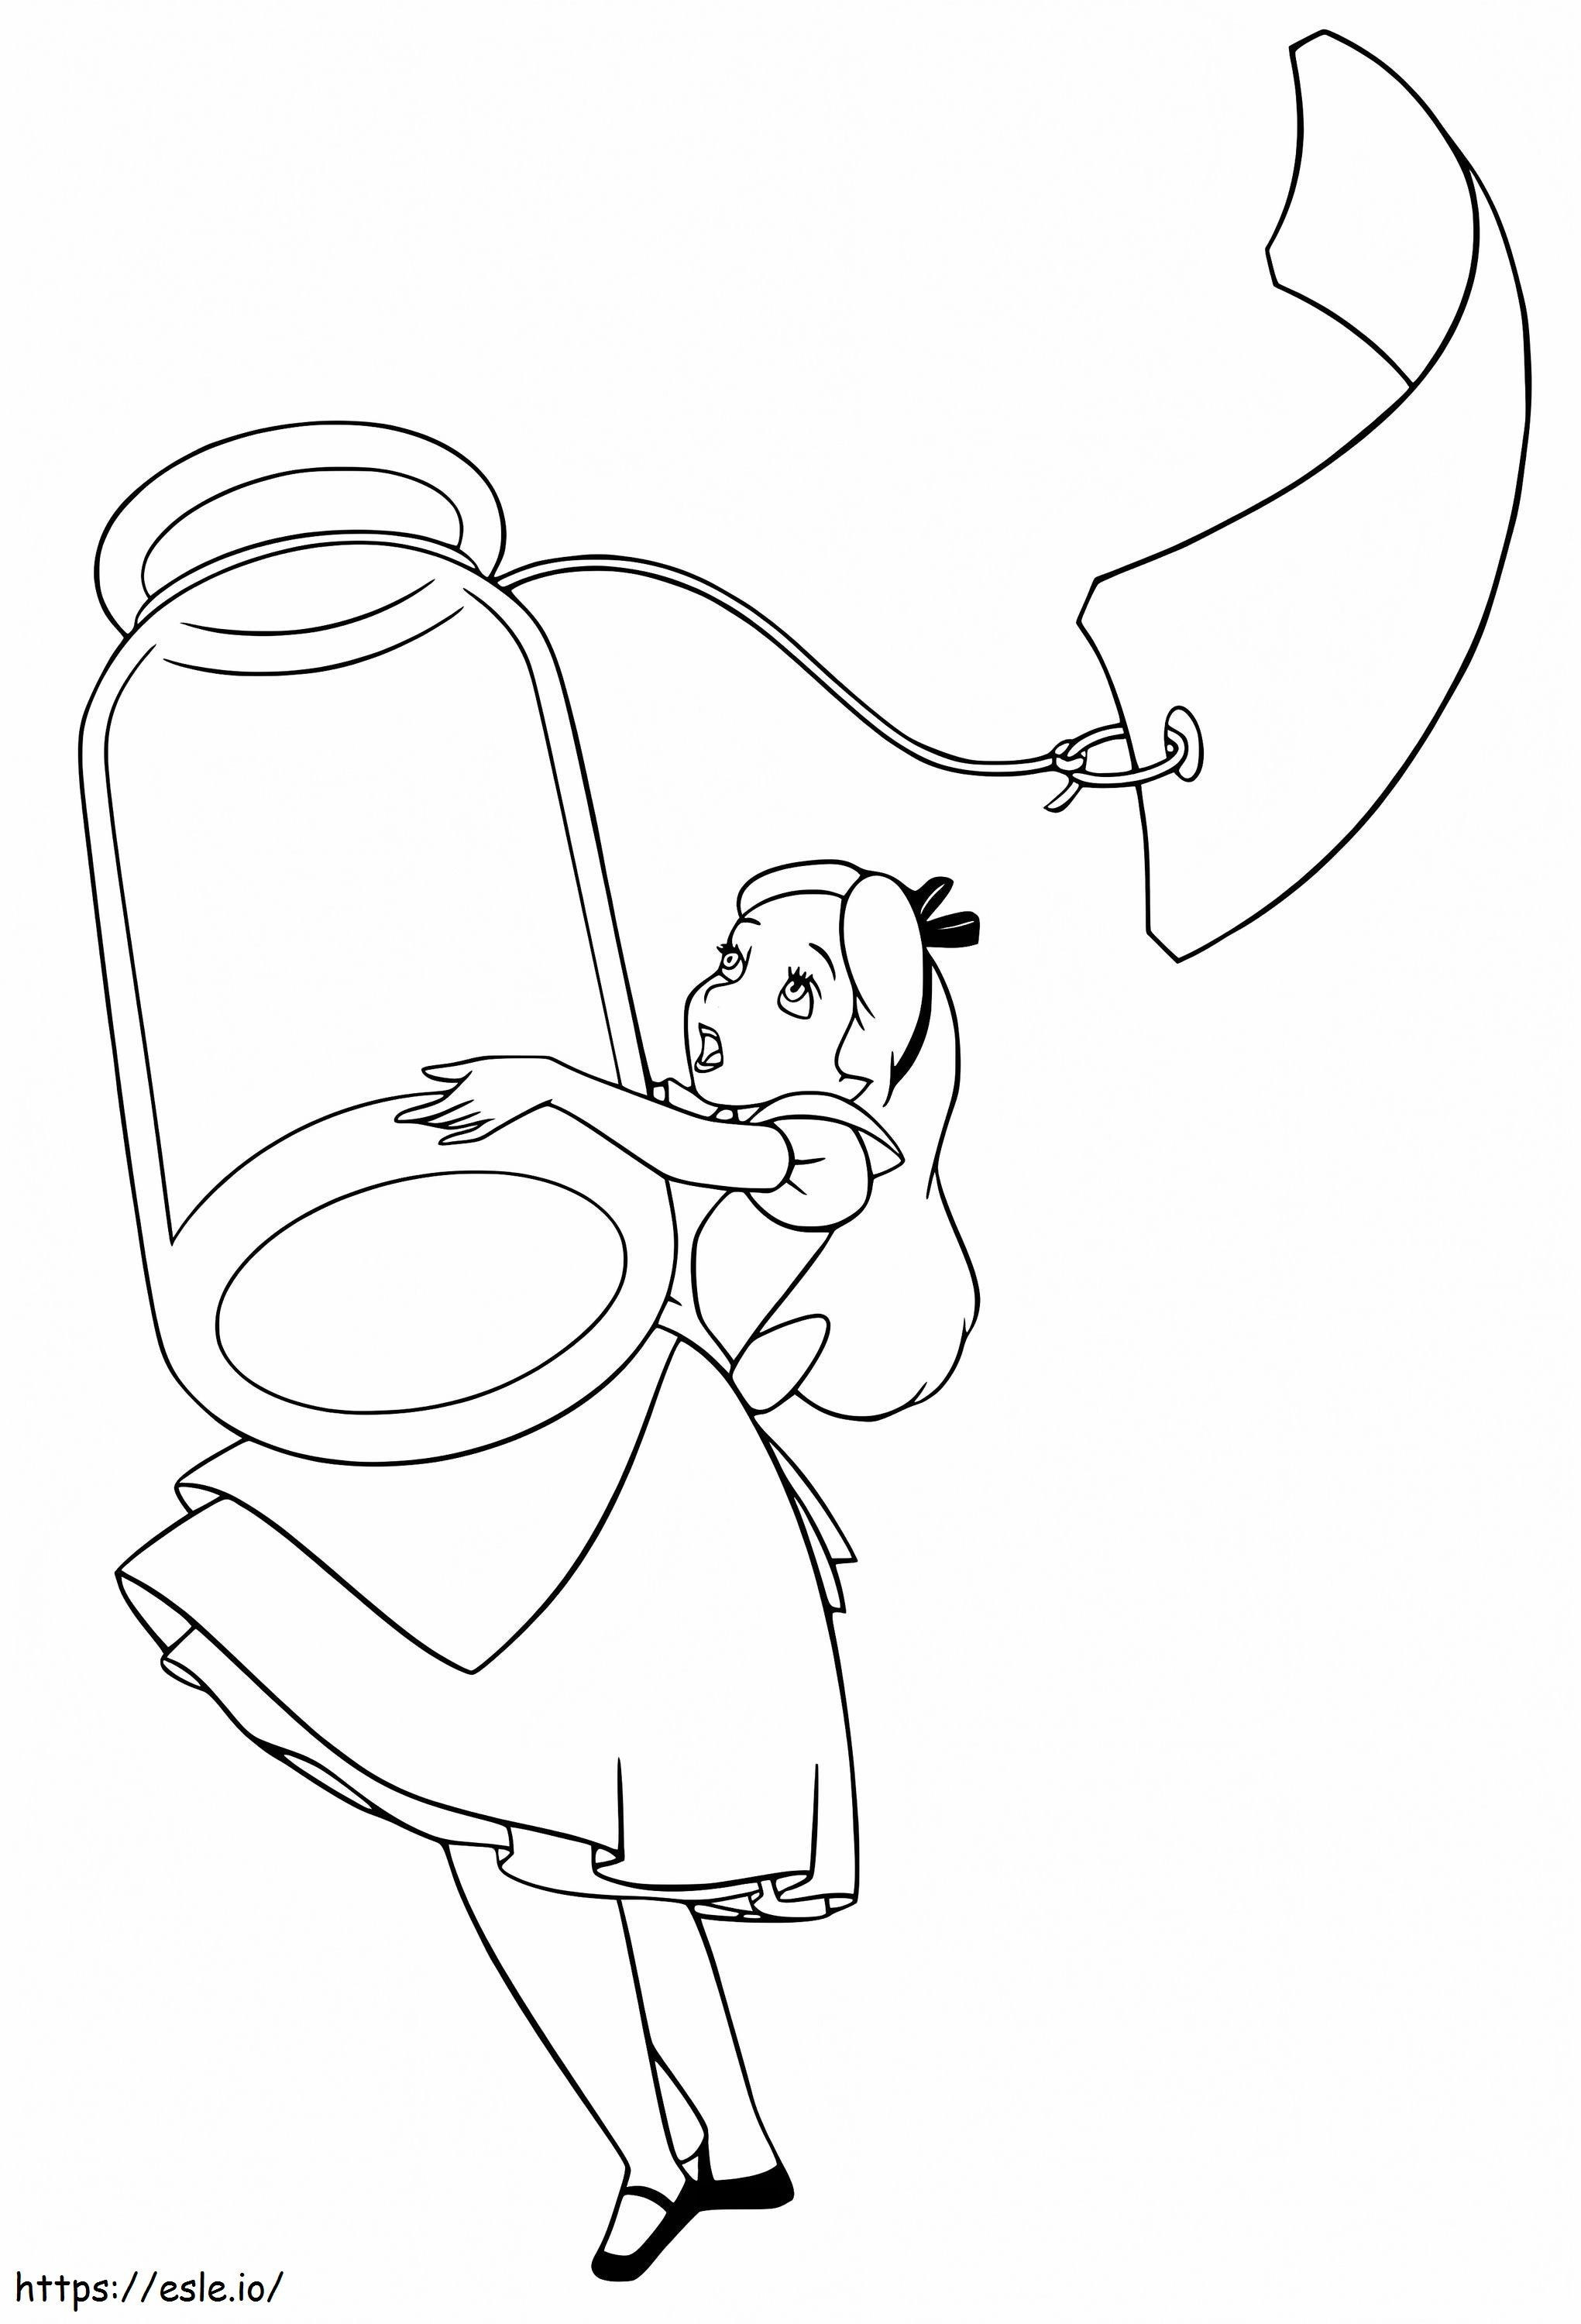 Tiny Alice coloring page